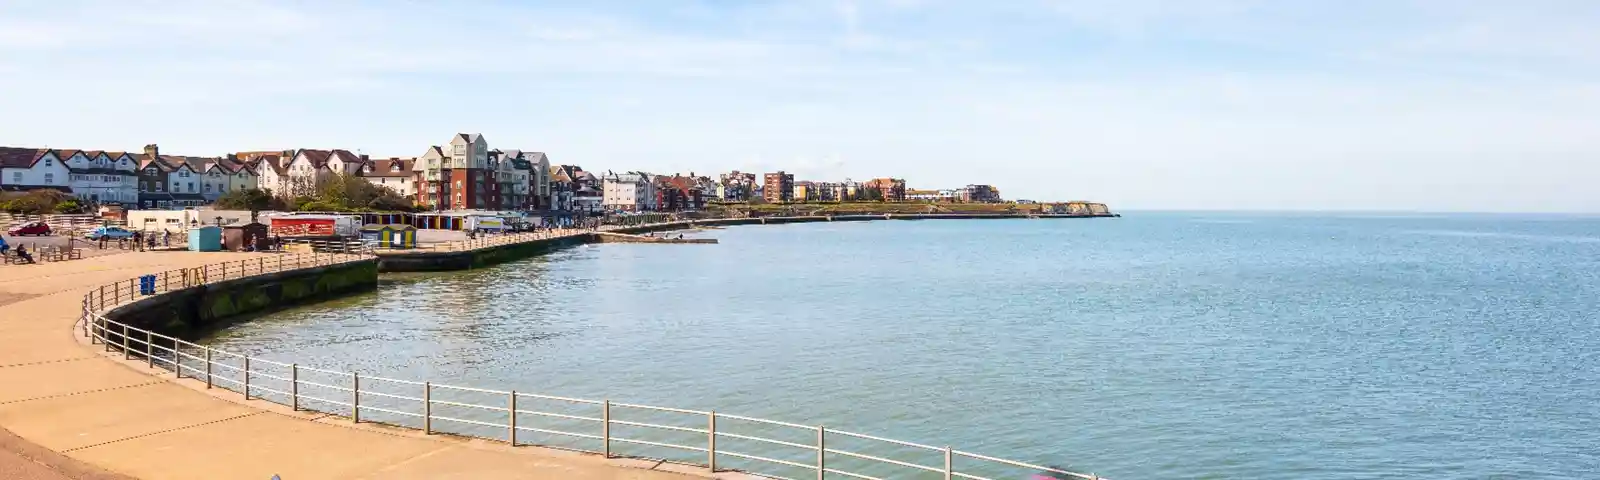 EDITED St Mildreds Bay 6 Credit Tourism At Thanet District Council